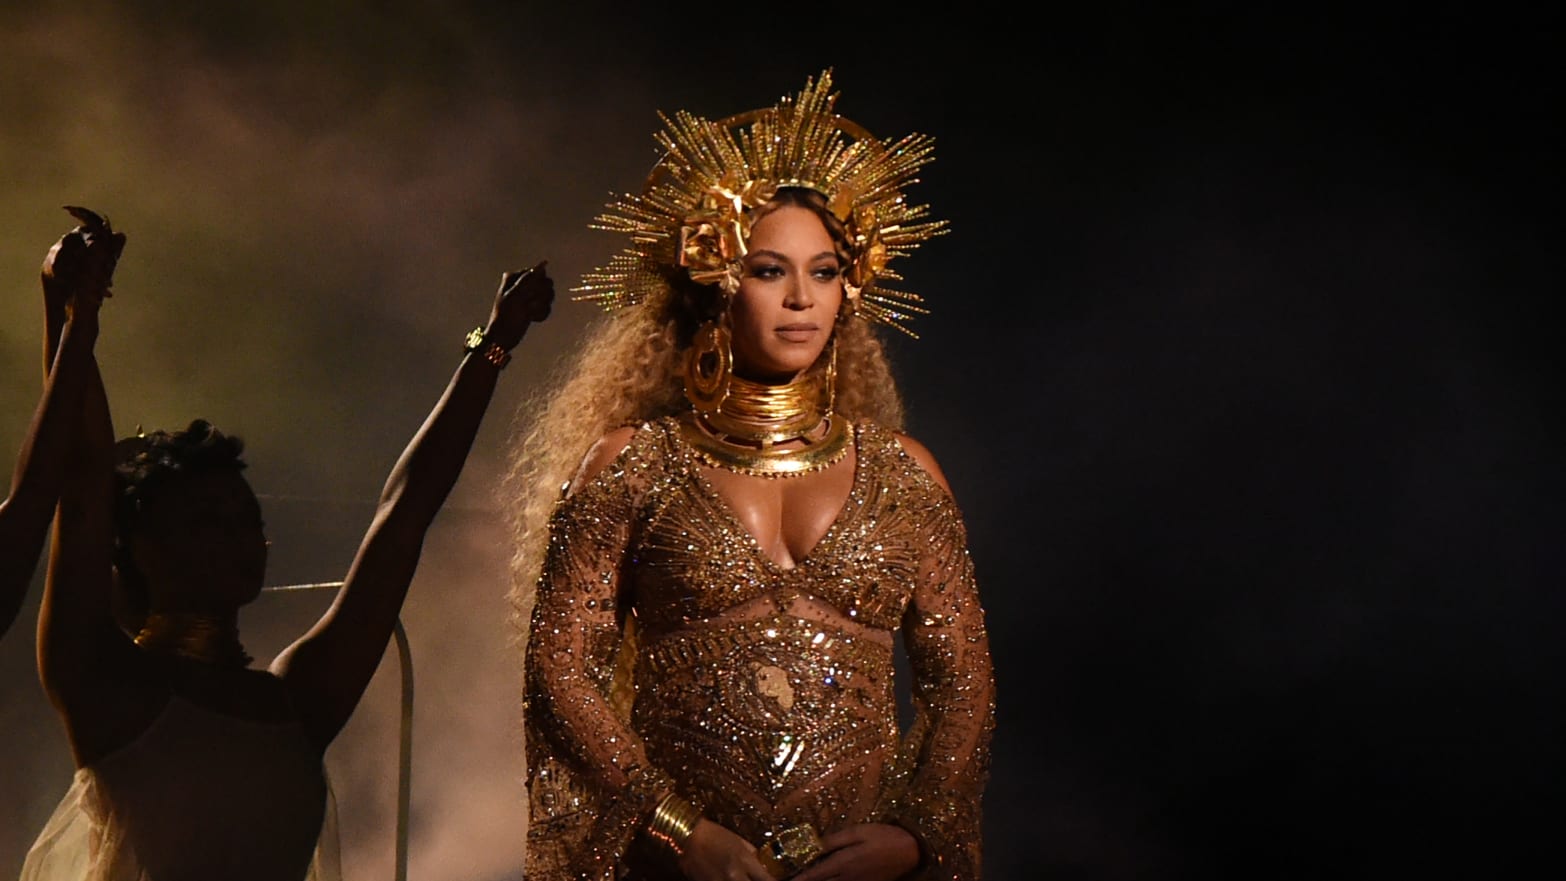 beyonce performs while pregnant with twins at 2017 grammys netflix homecoming preeclampsia sFlt1 pregnancy sir rumi Advanced Prenatal Therapeutics Targeted Apheresis Column TAC-PE pee test congo red dot fda